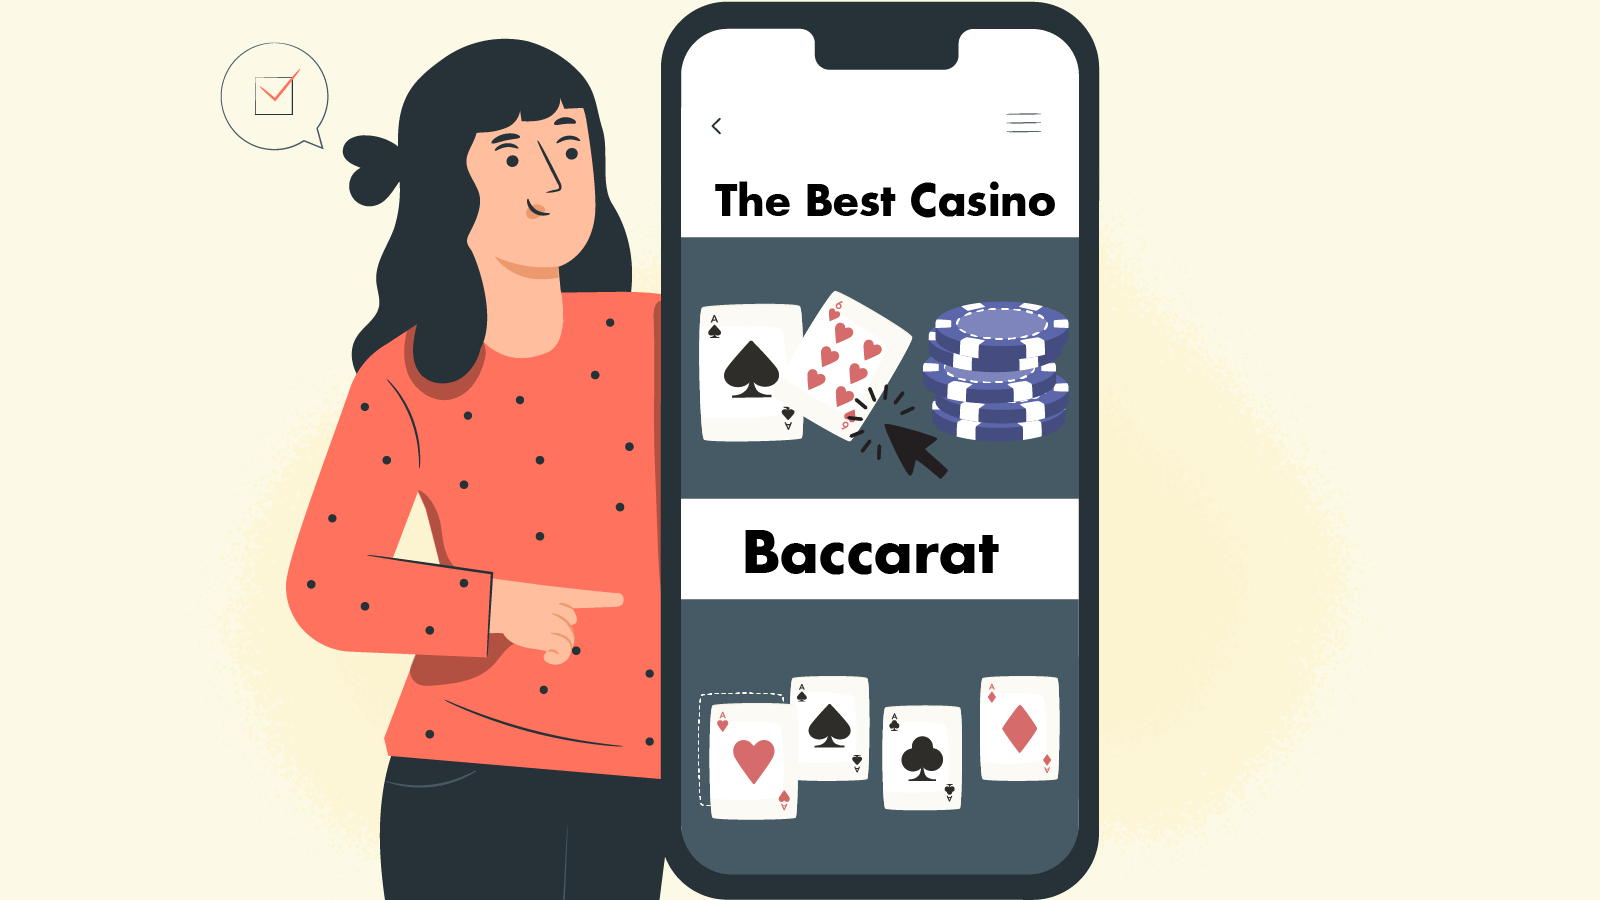 The Best Casino for Baccarat